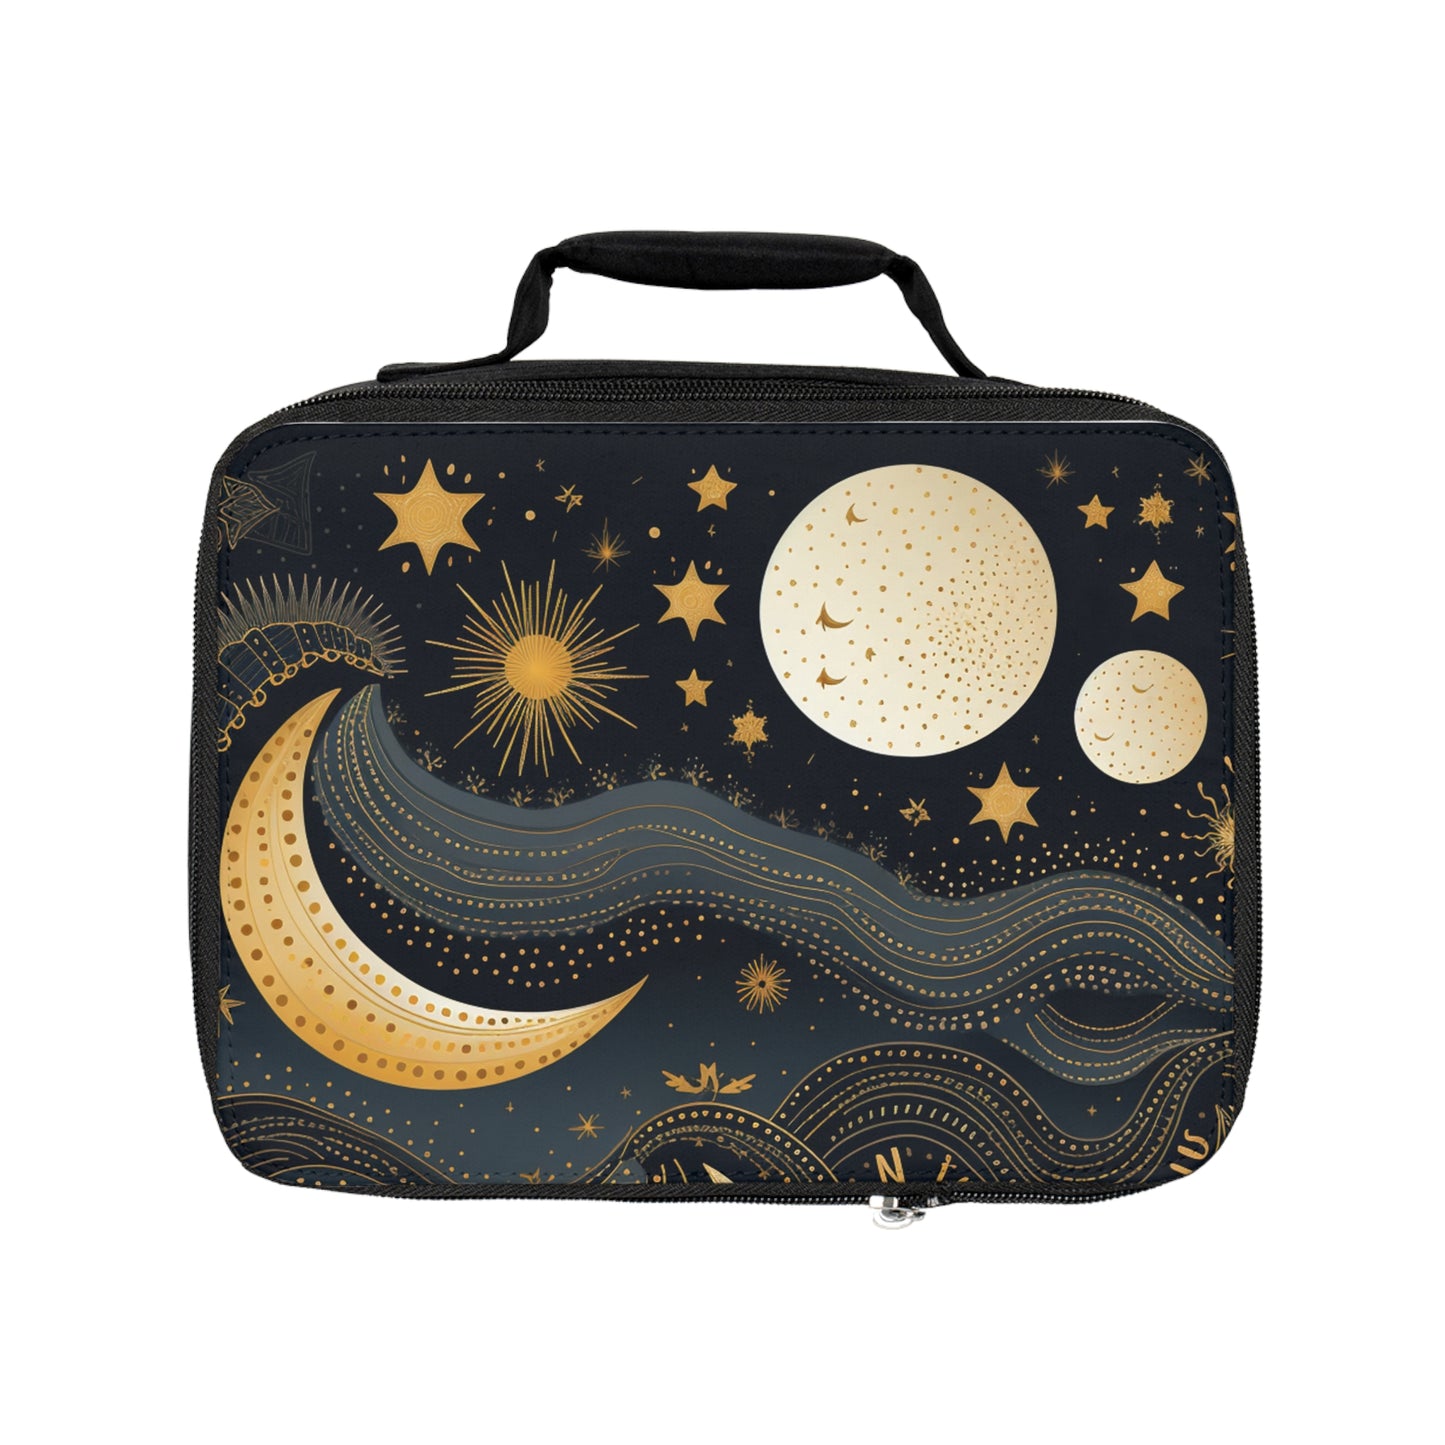 Celestial Moon Lunch Bag | Cosmic Stars, Sun, Galaxies Lunch Accessories